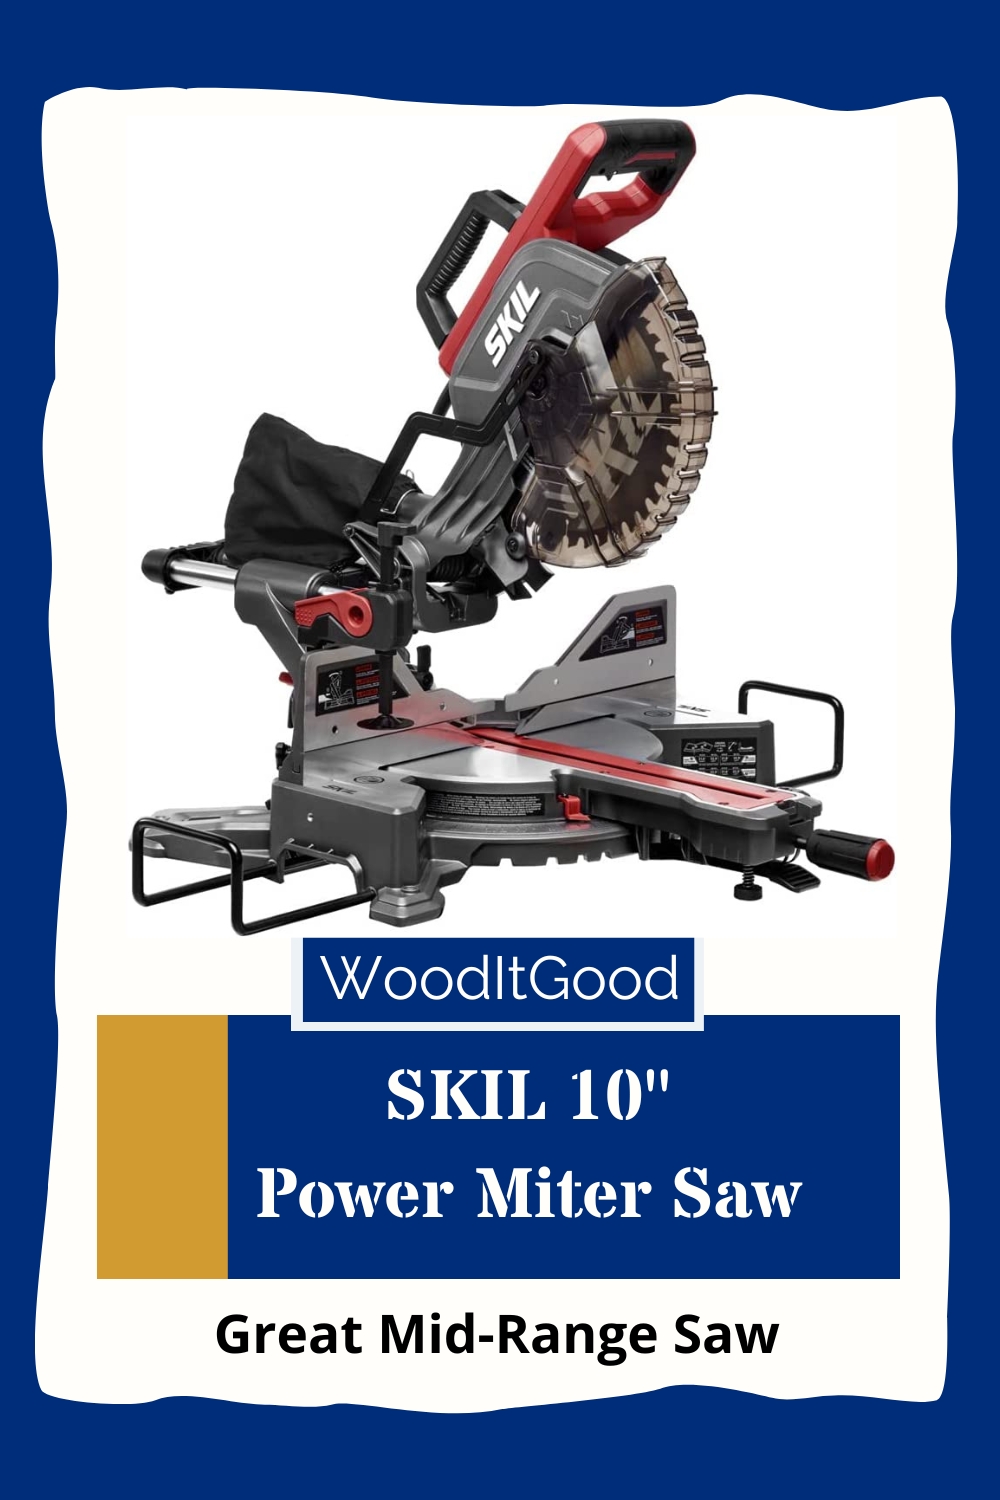 This SKIL 10 Inch Dual Bevel Miter Saw is a nice solid good quality saw for a good price.  It's what I'd qualify as mid-range.